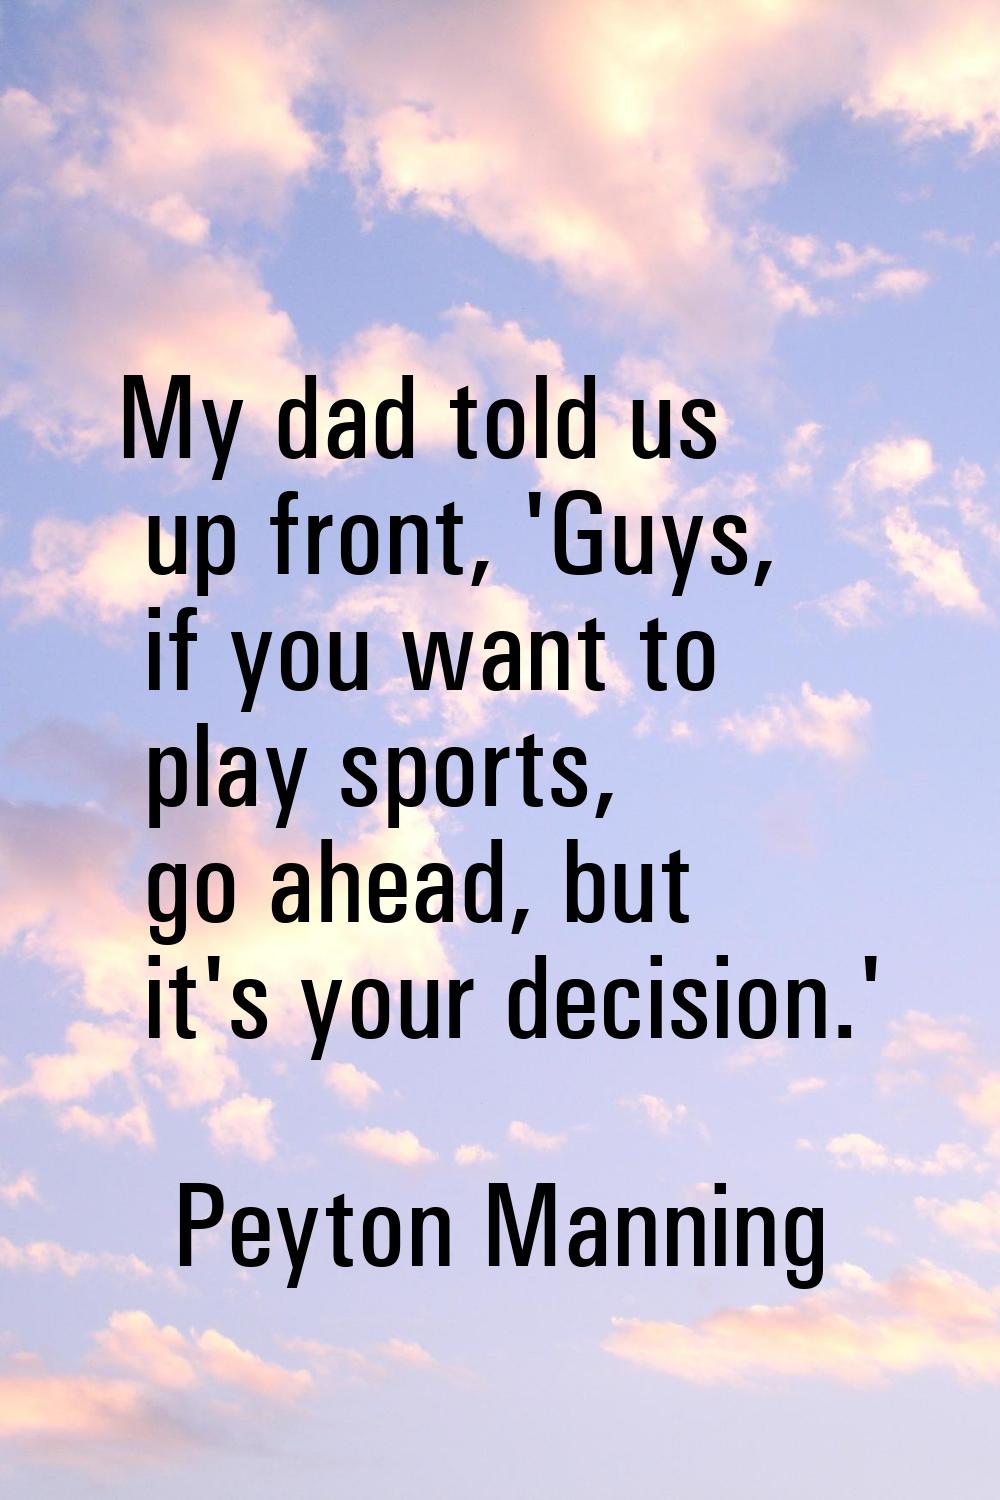 My dad told us up front, 'Guys, if you want to play sports, go ahead, but it's your decision.'